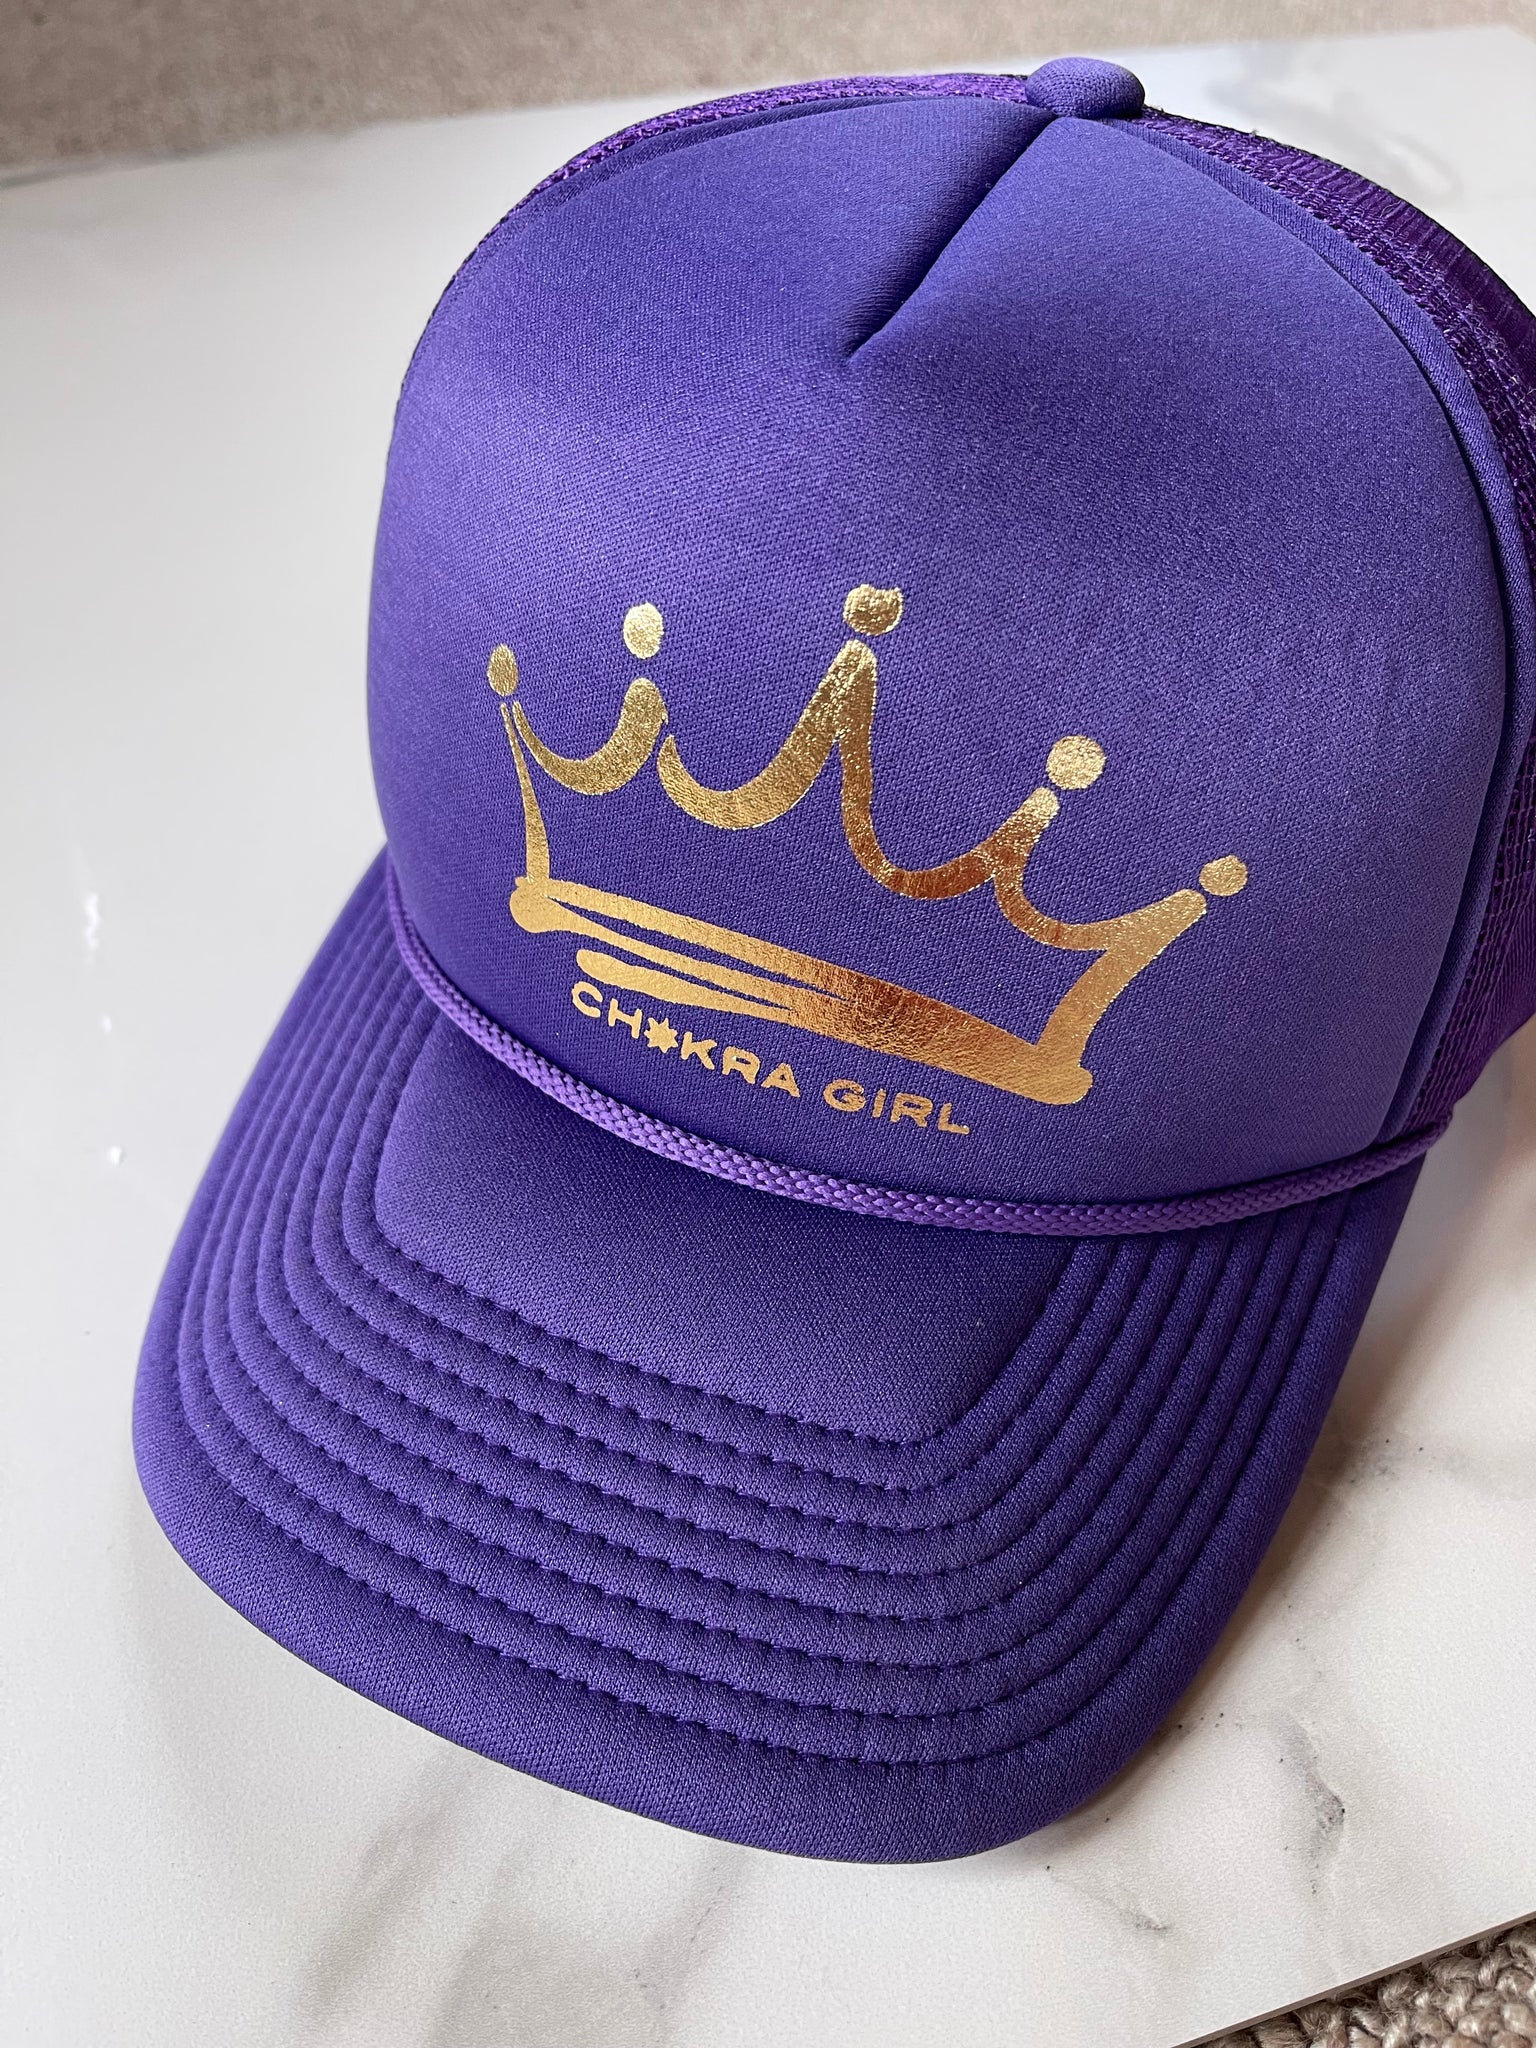 purple and gold crown